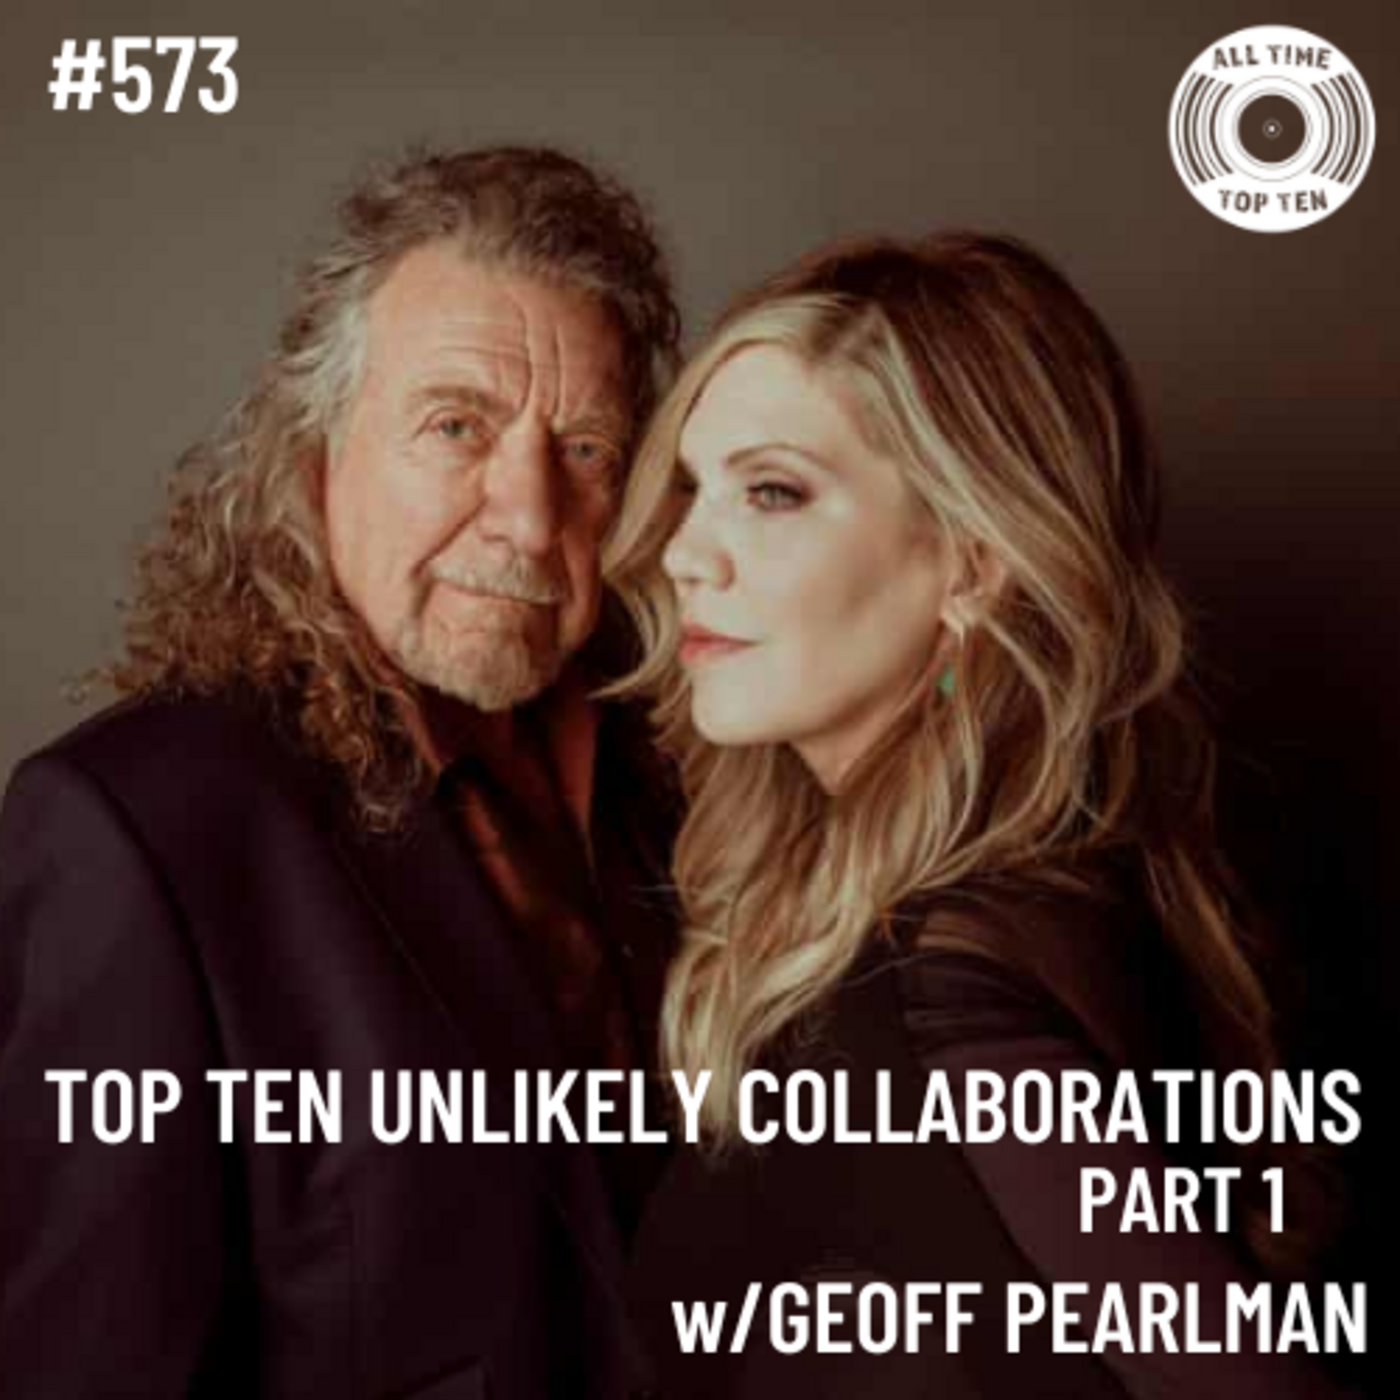 Episode 573 - Top Ten Unlikely Collaborations Part 1 w/Geoff Pearlman